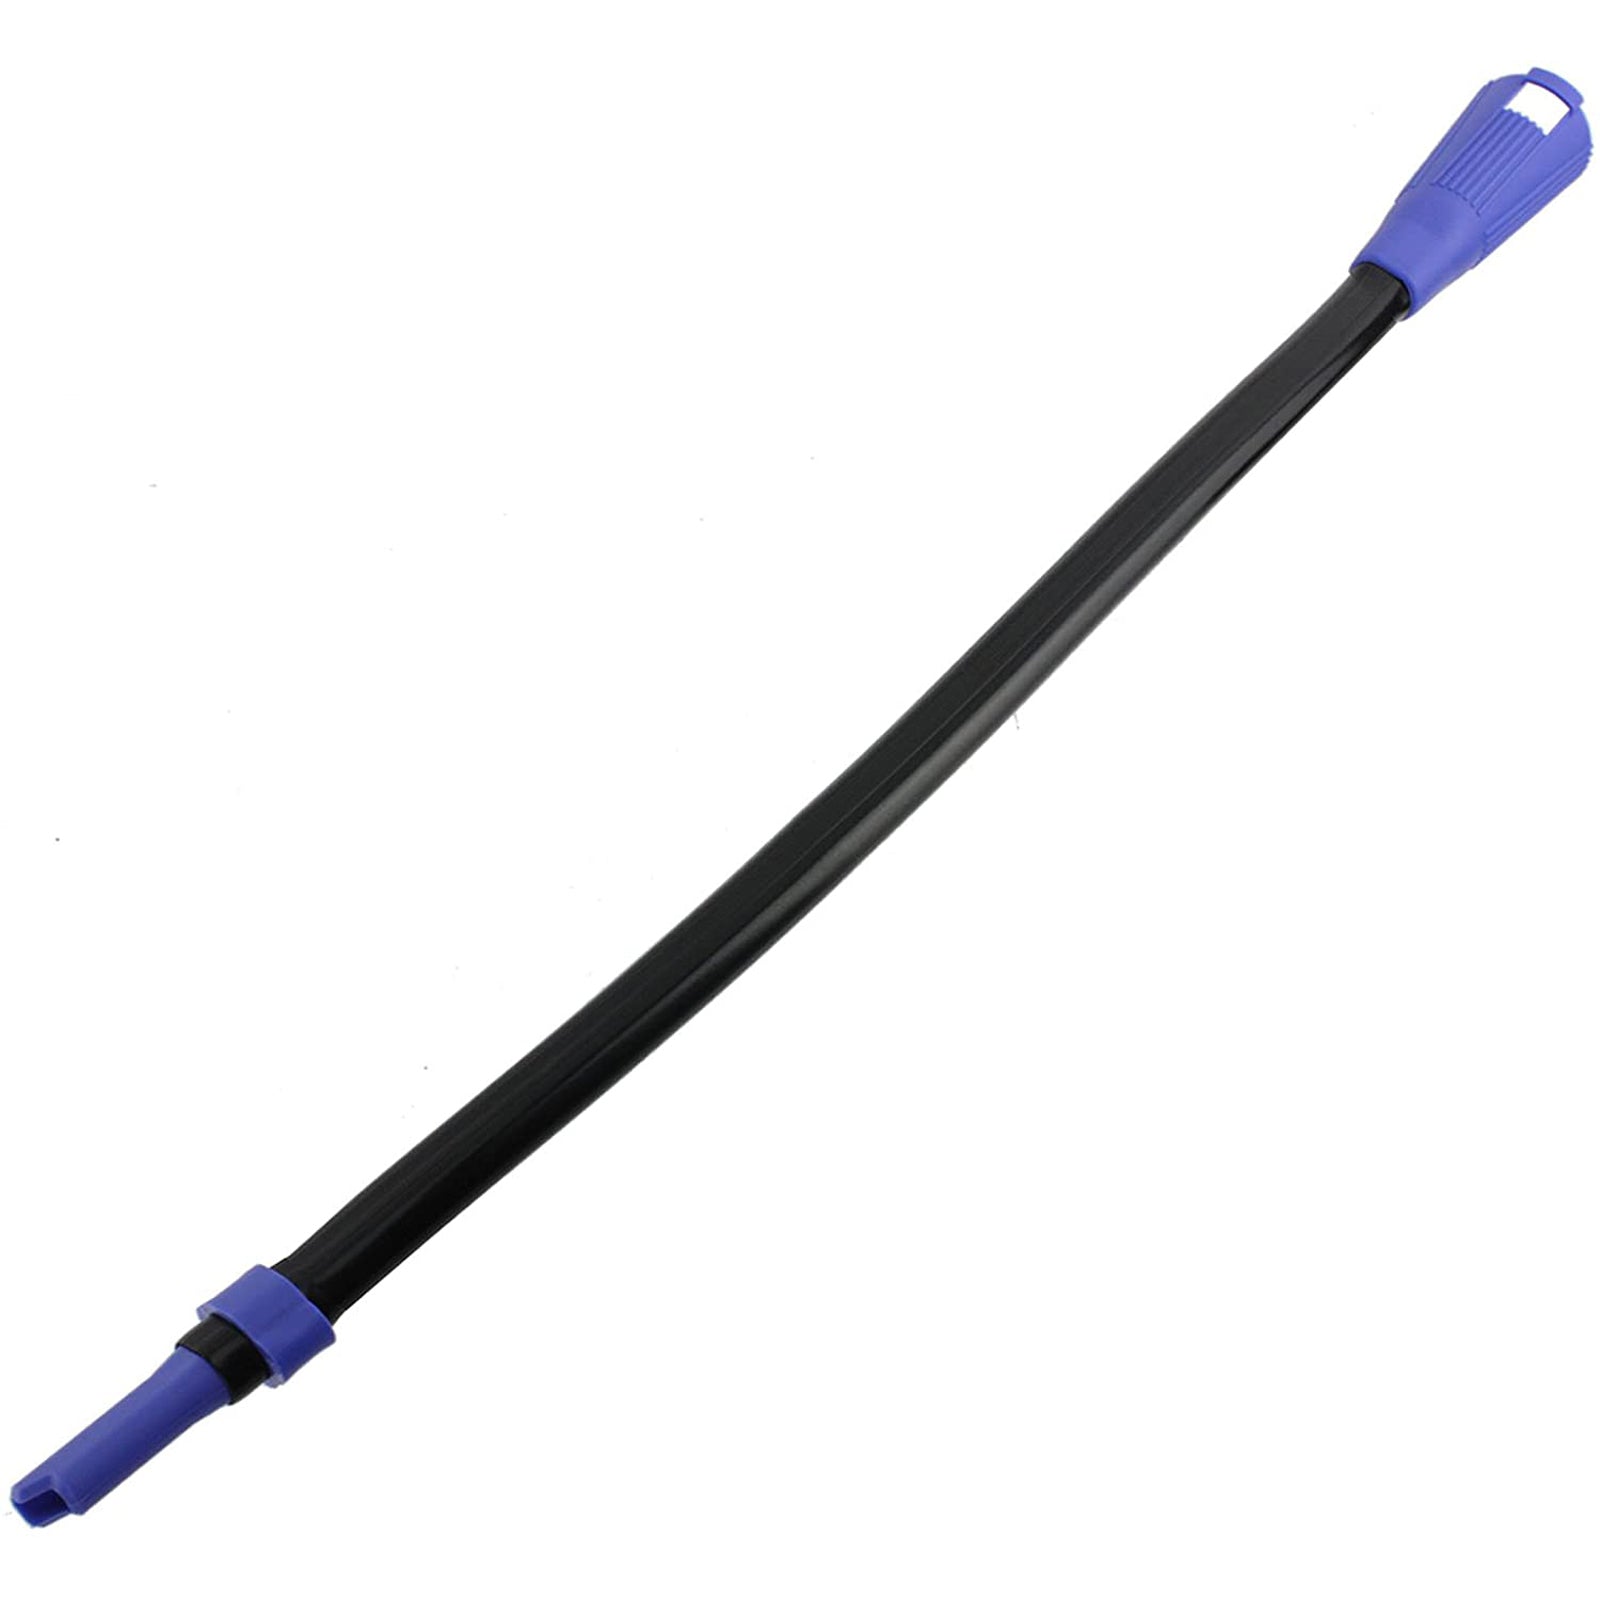 Universal Vacuum Cleaner Flexible Long Crevice Wand Tool (670mm)